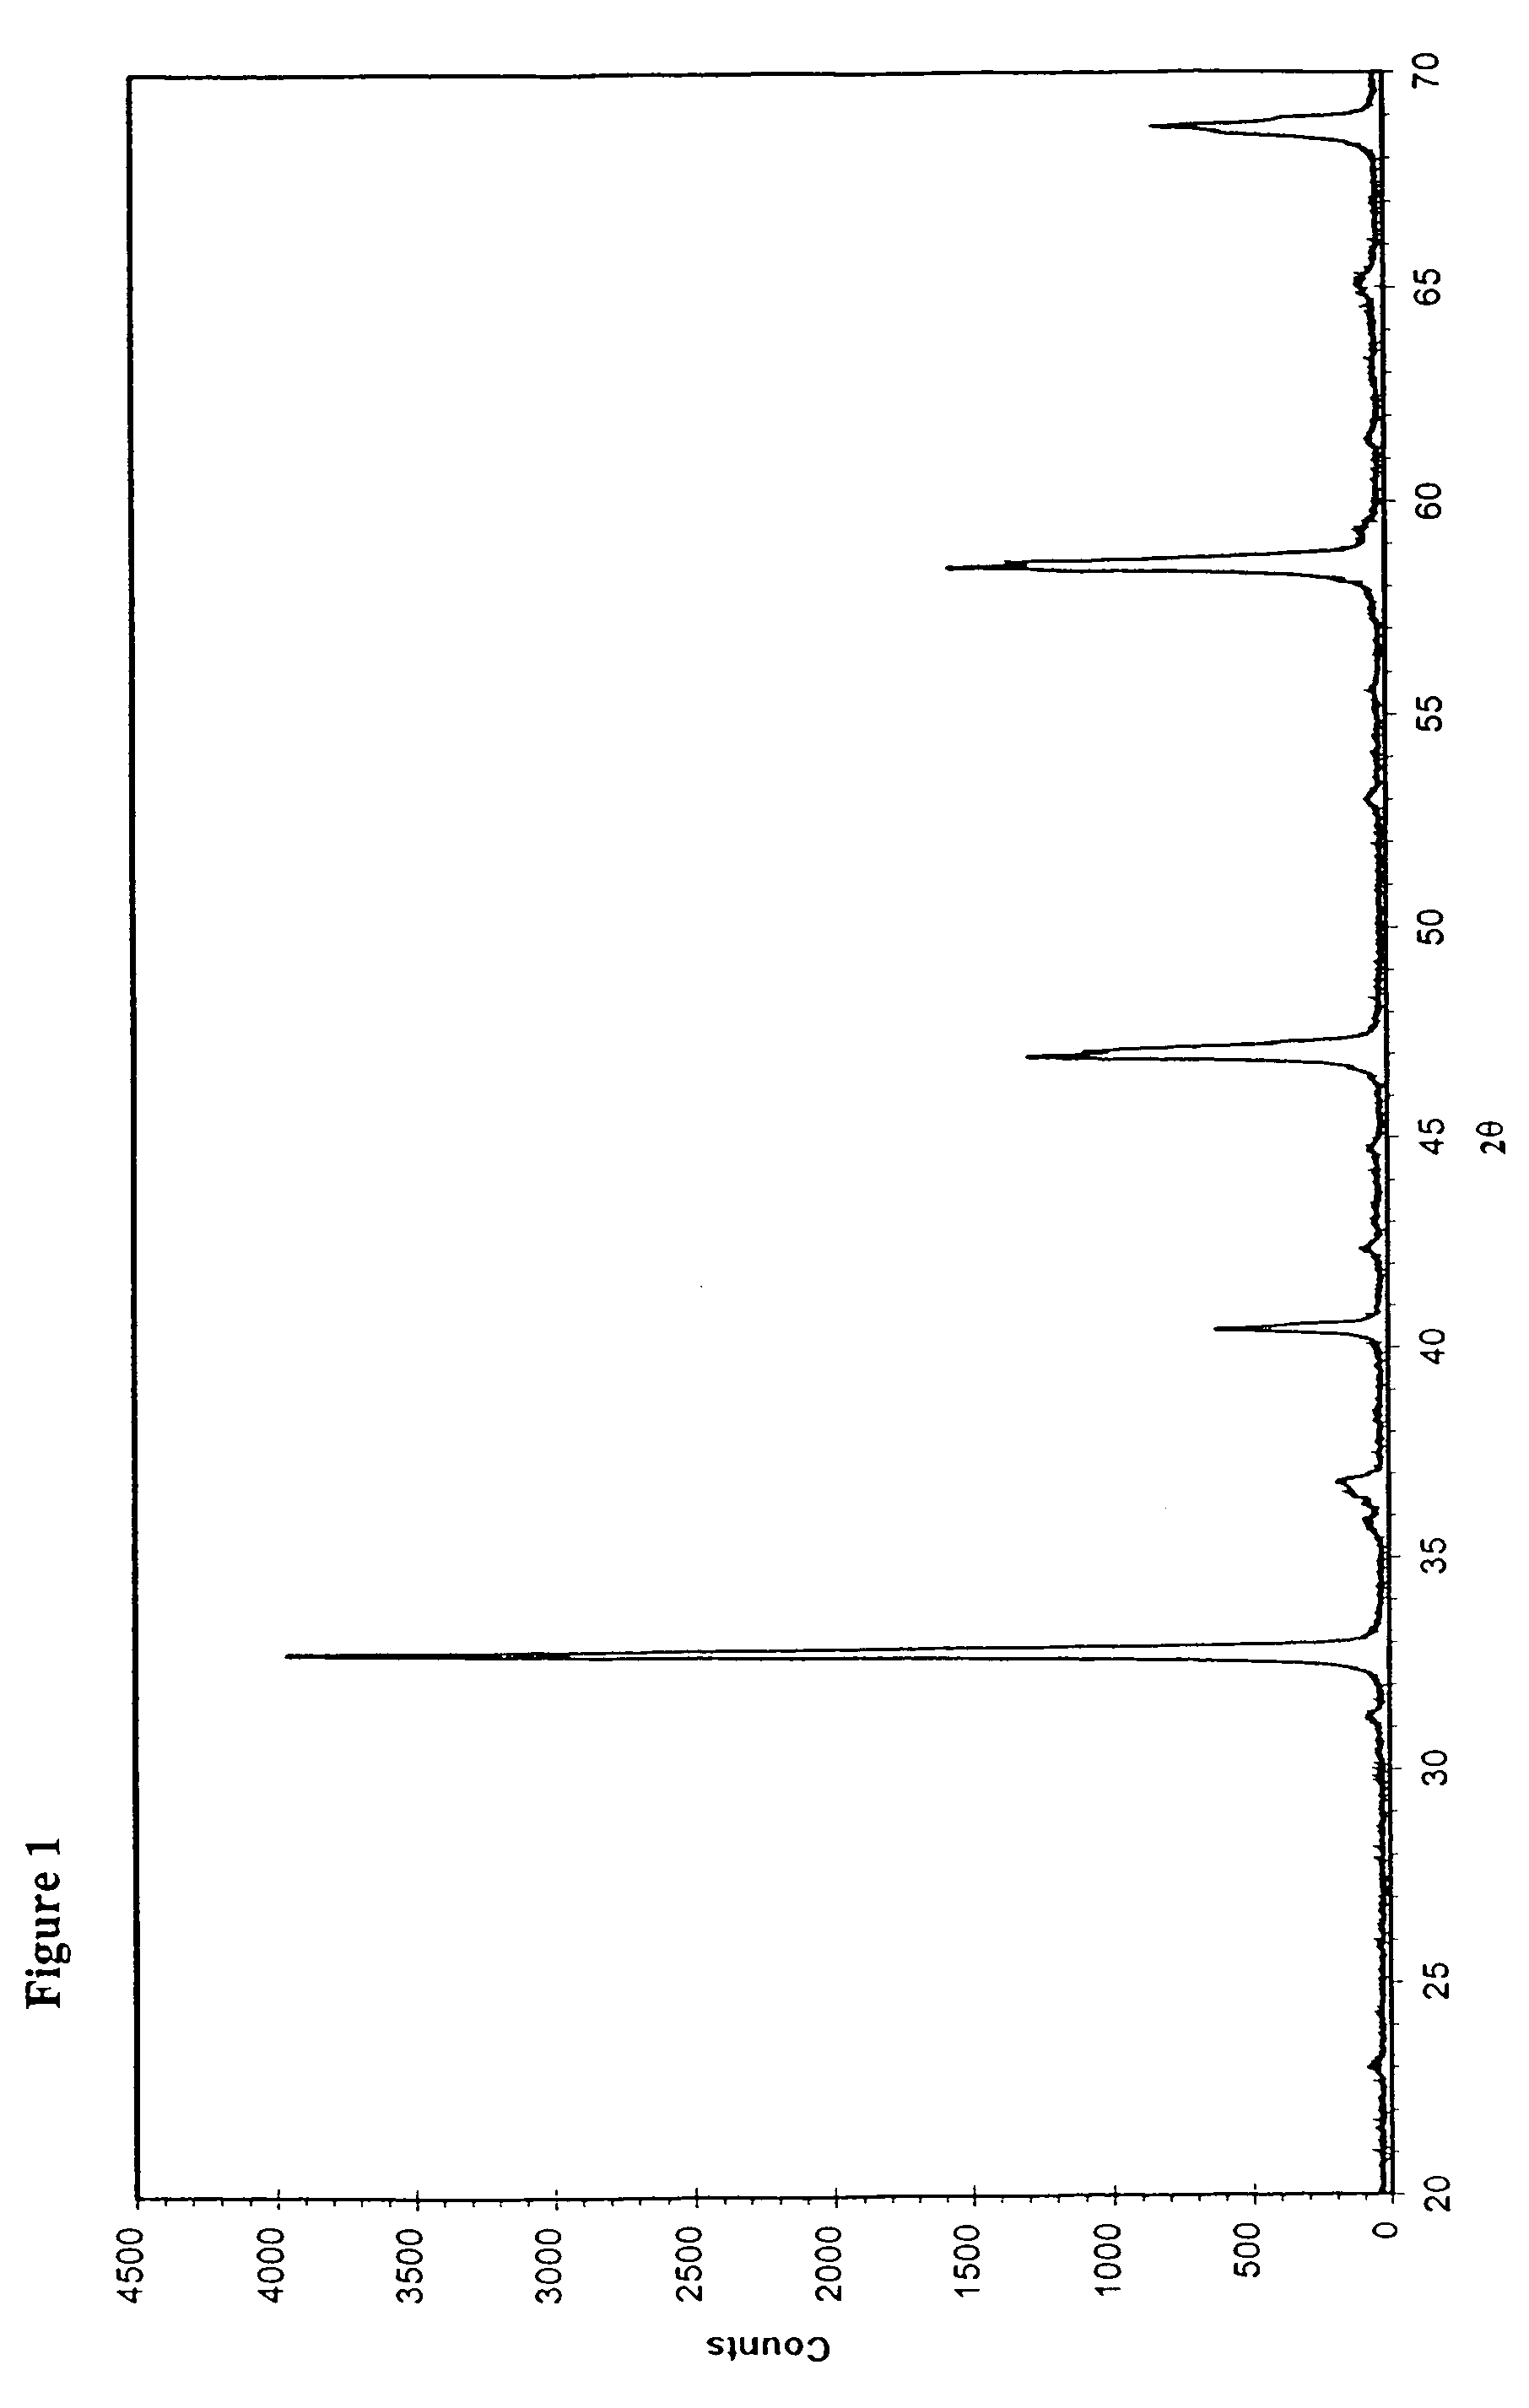 Supported perovskite-type oxides and methods for preparation thereof